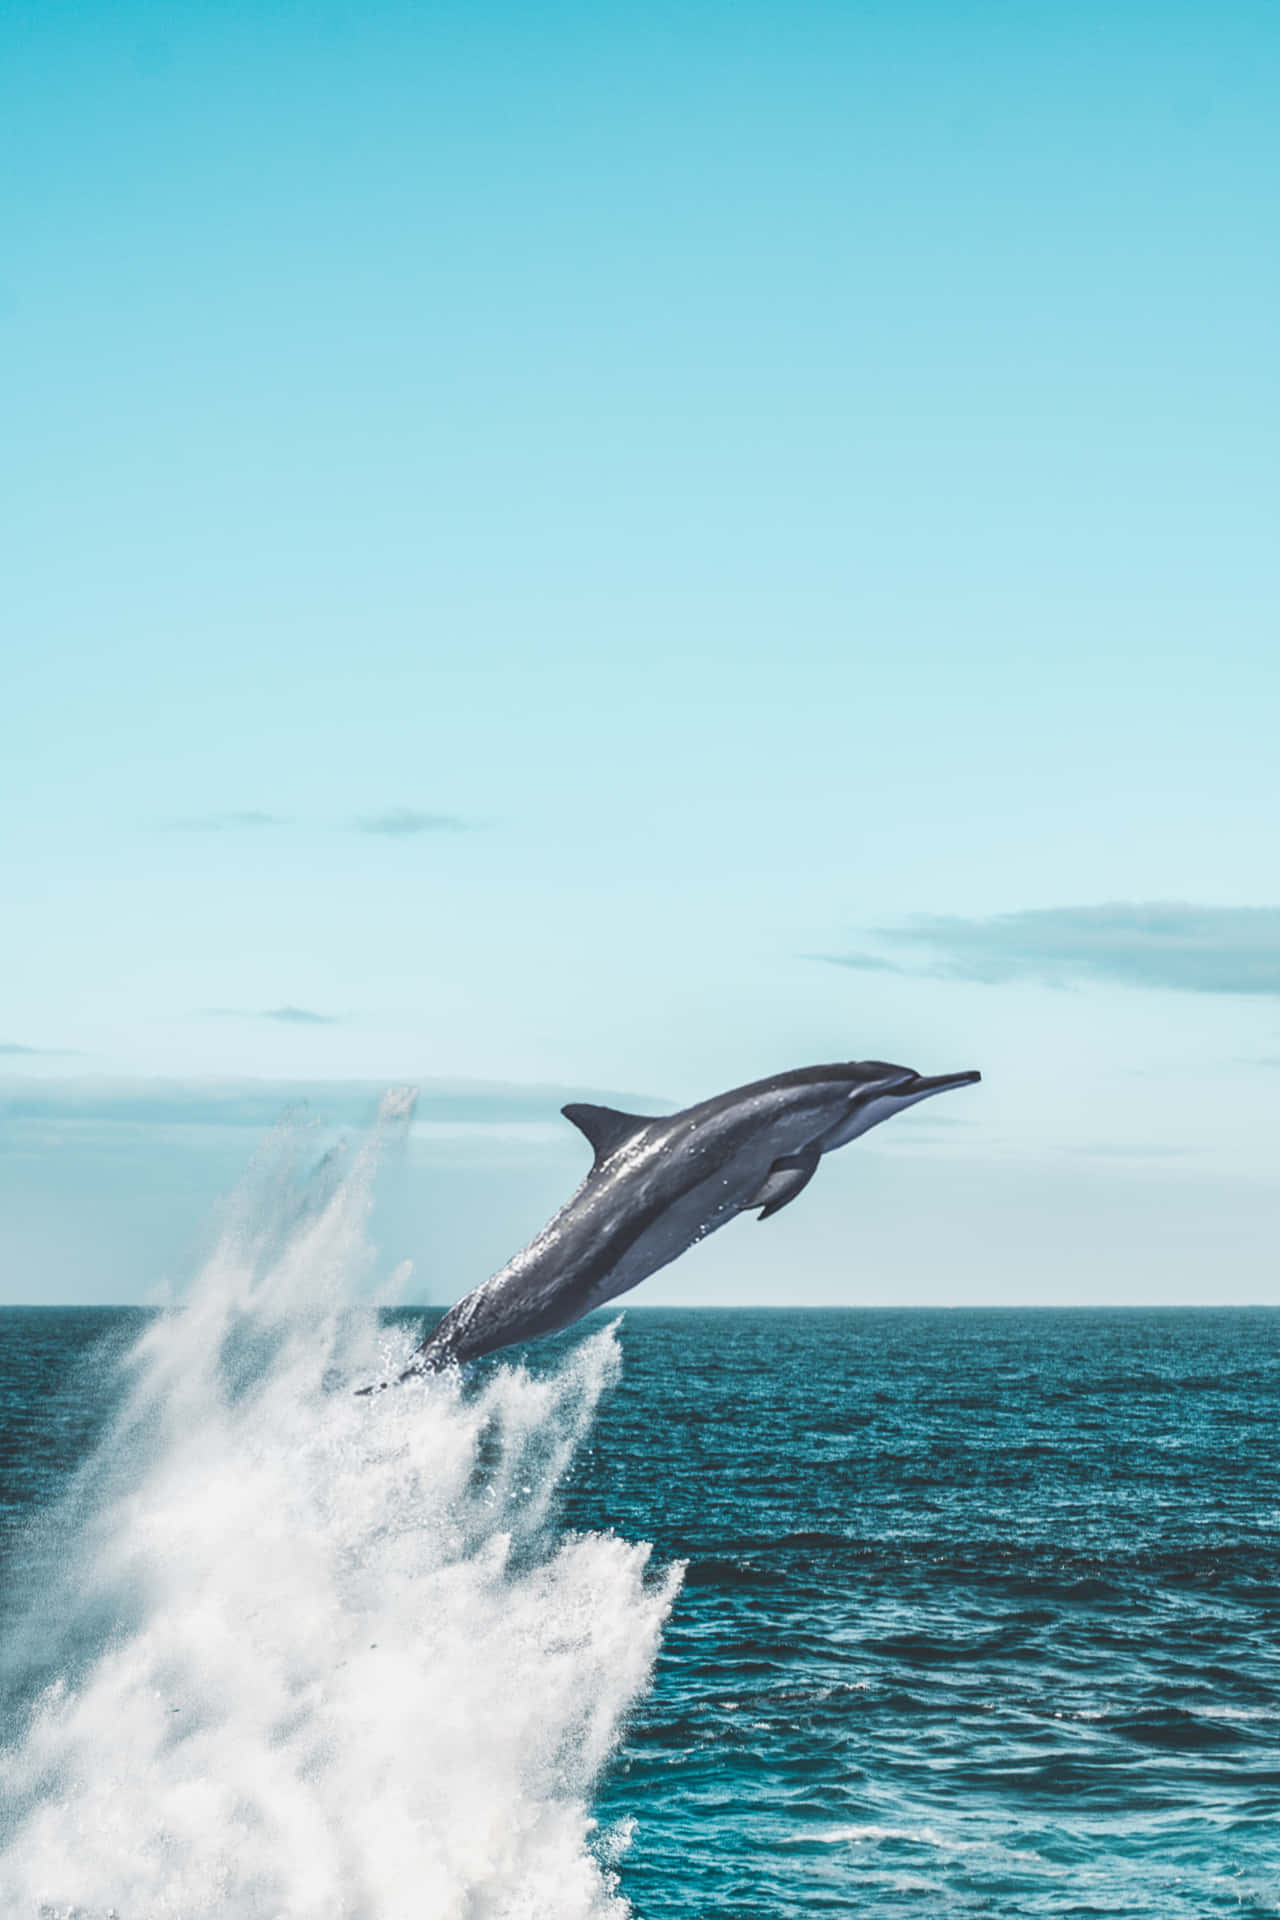 Graceful Leaps: A Dolphin In Mid-air